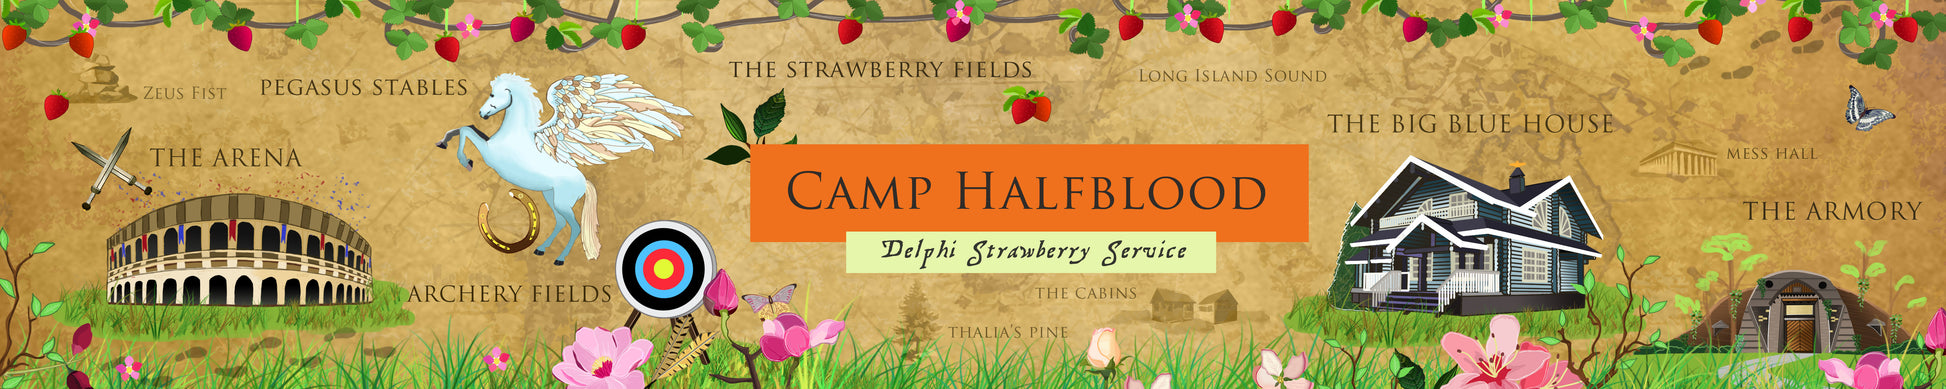 Camp Halfblood scented candle label candle by Happy Piranha